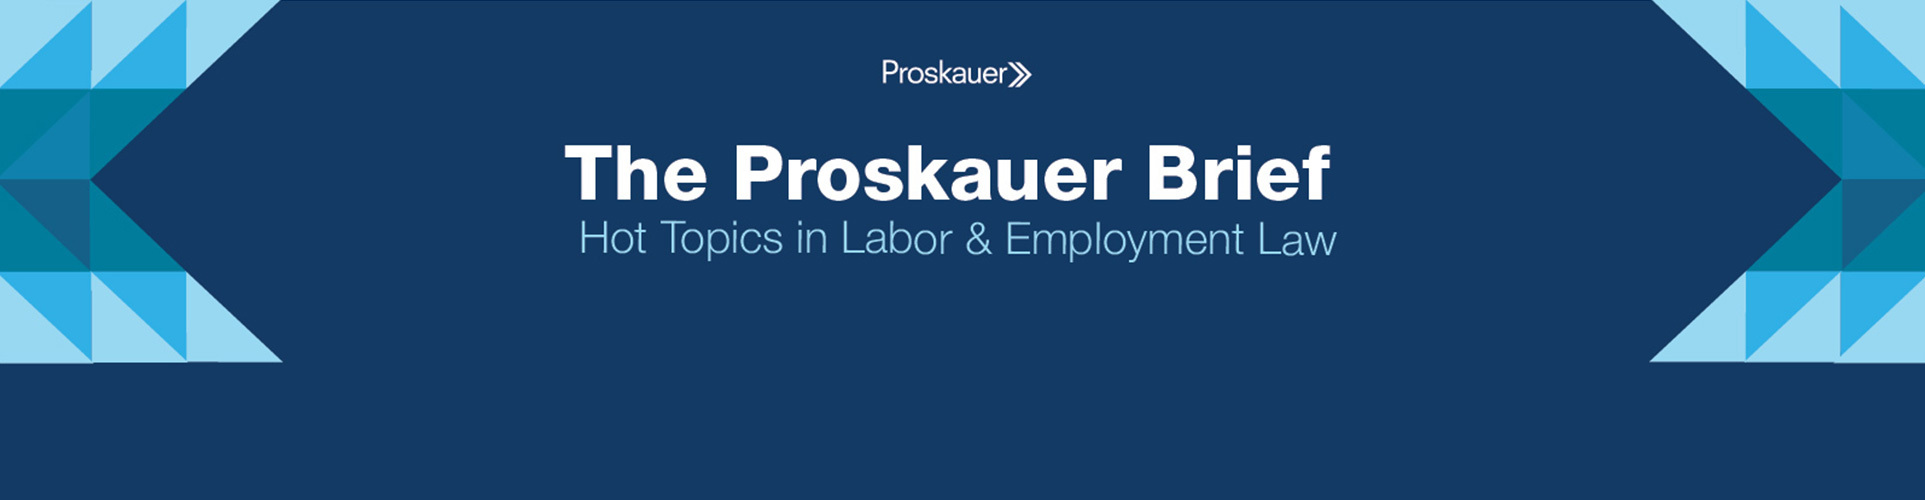 The Proskauer Brief: Hot Topics in Labor & Employment Law